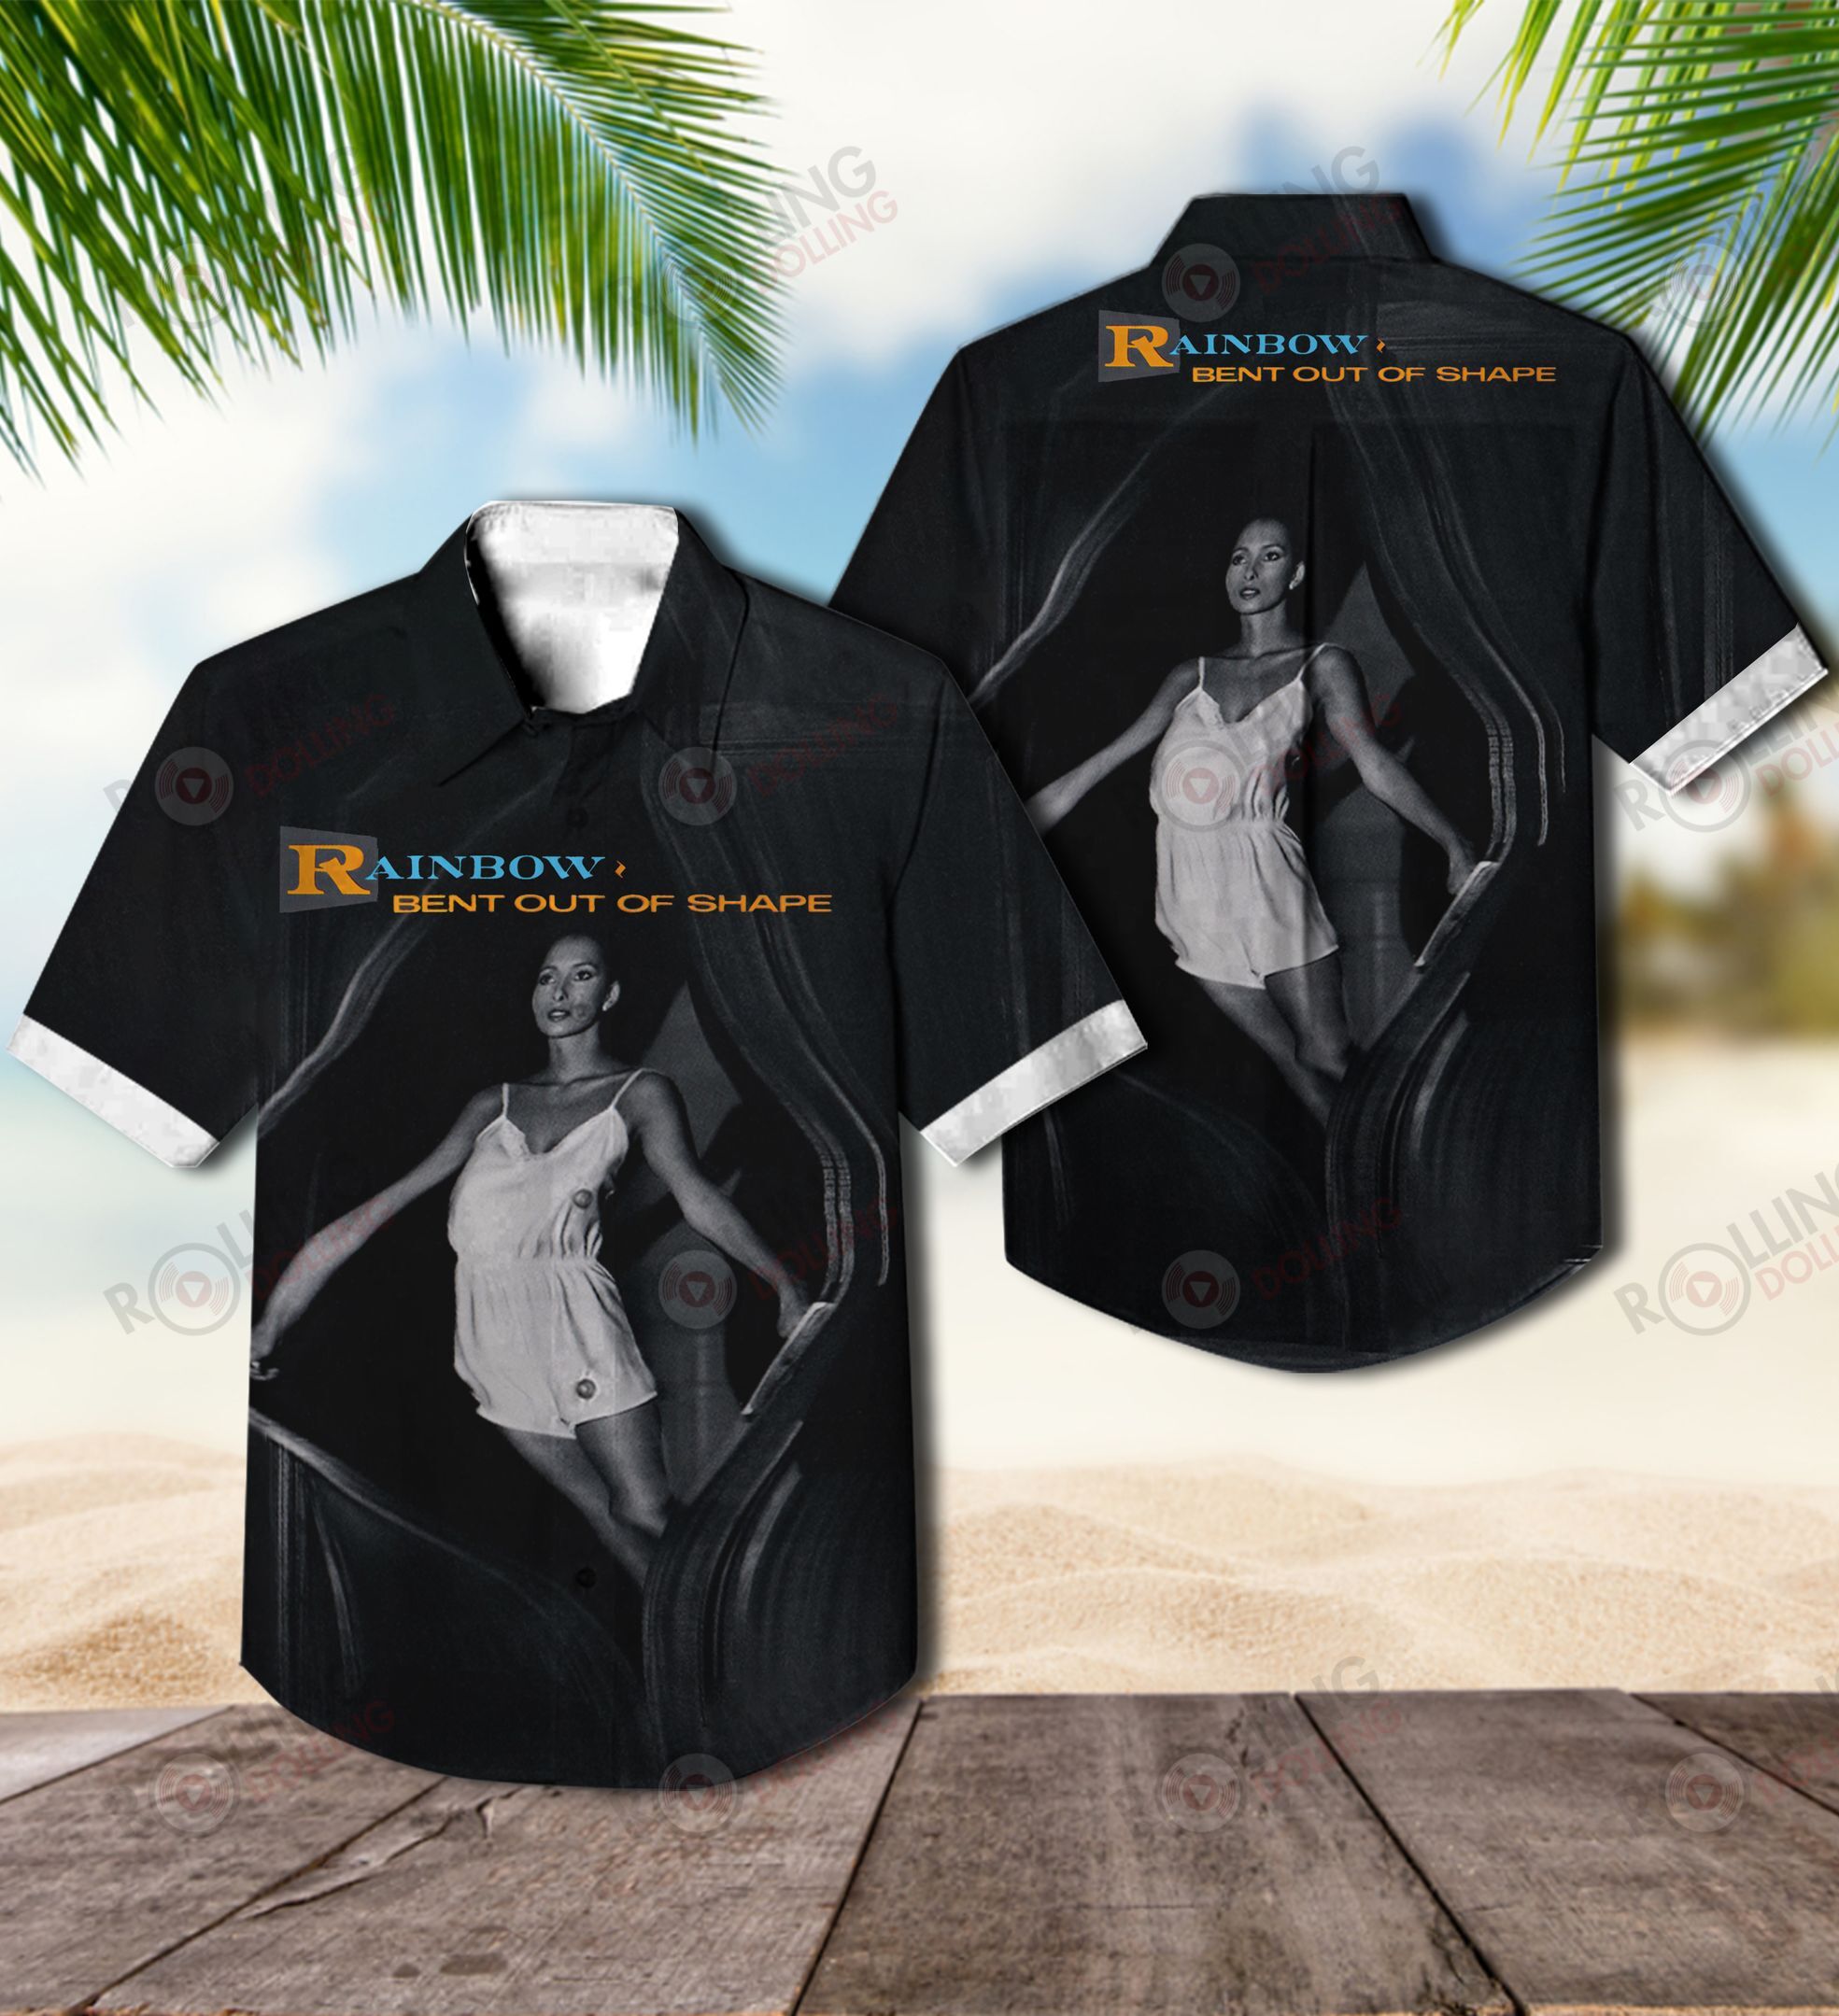 The Hawaiian Shirt is a popular shirt that is worn by Rock band fans 18